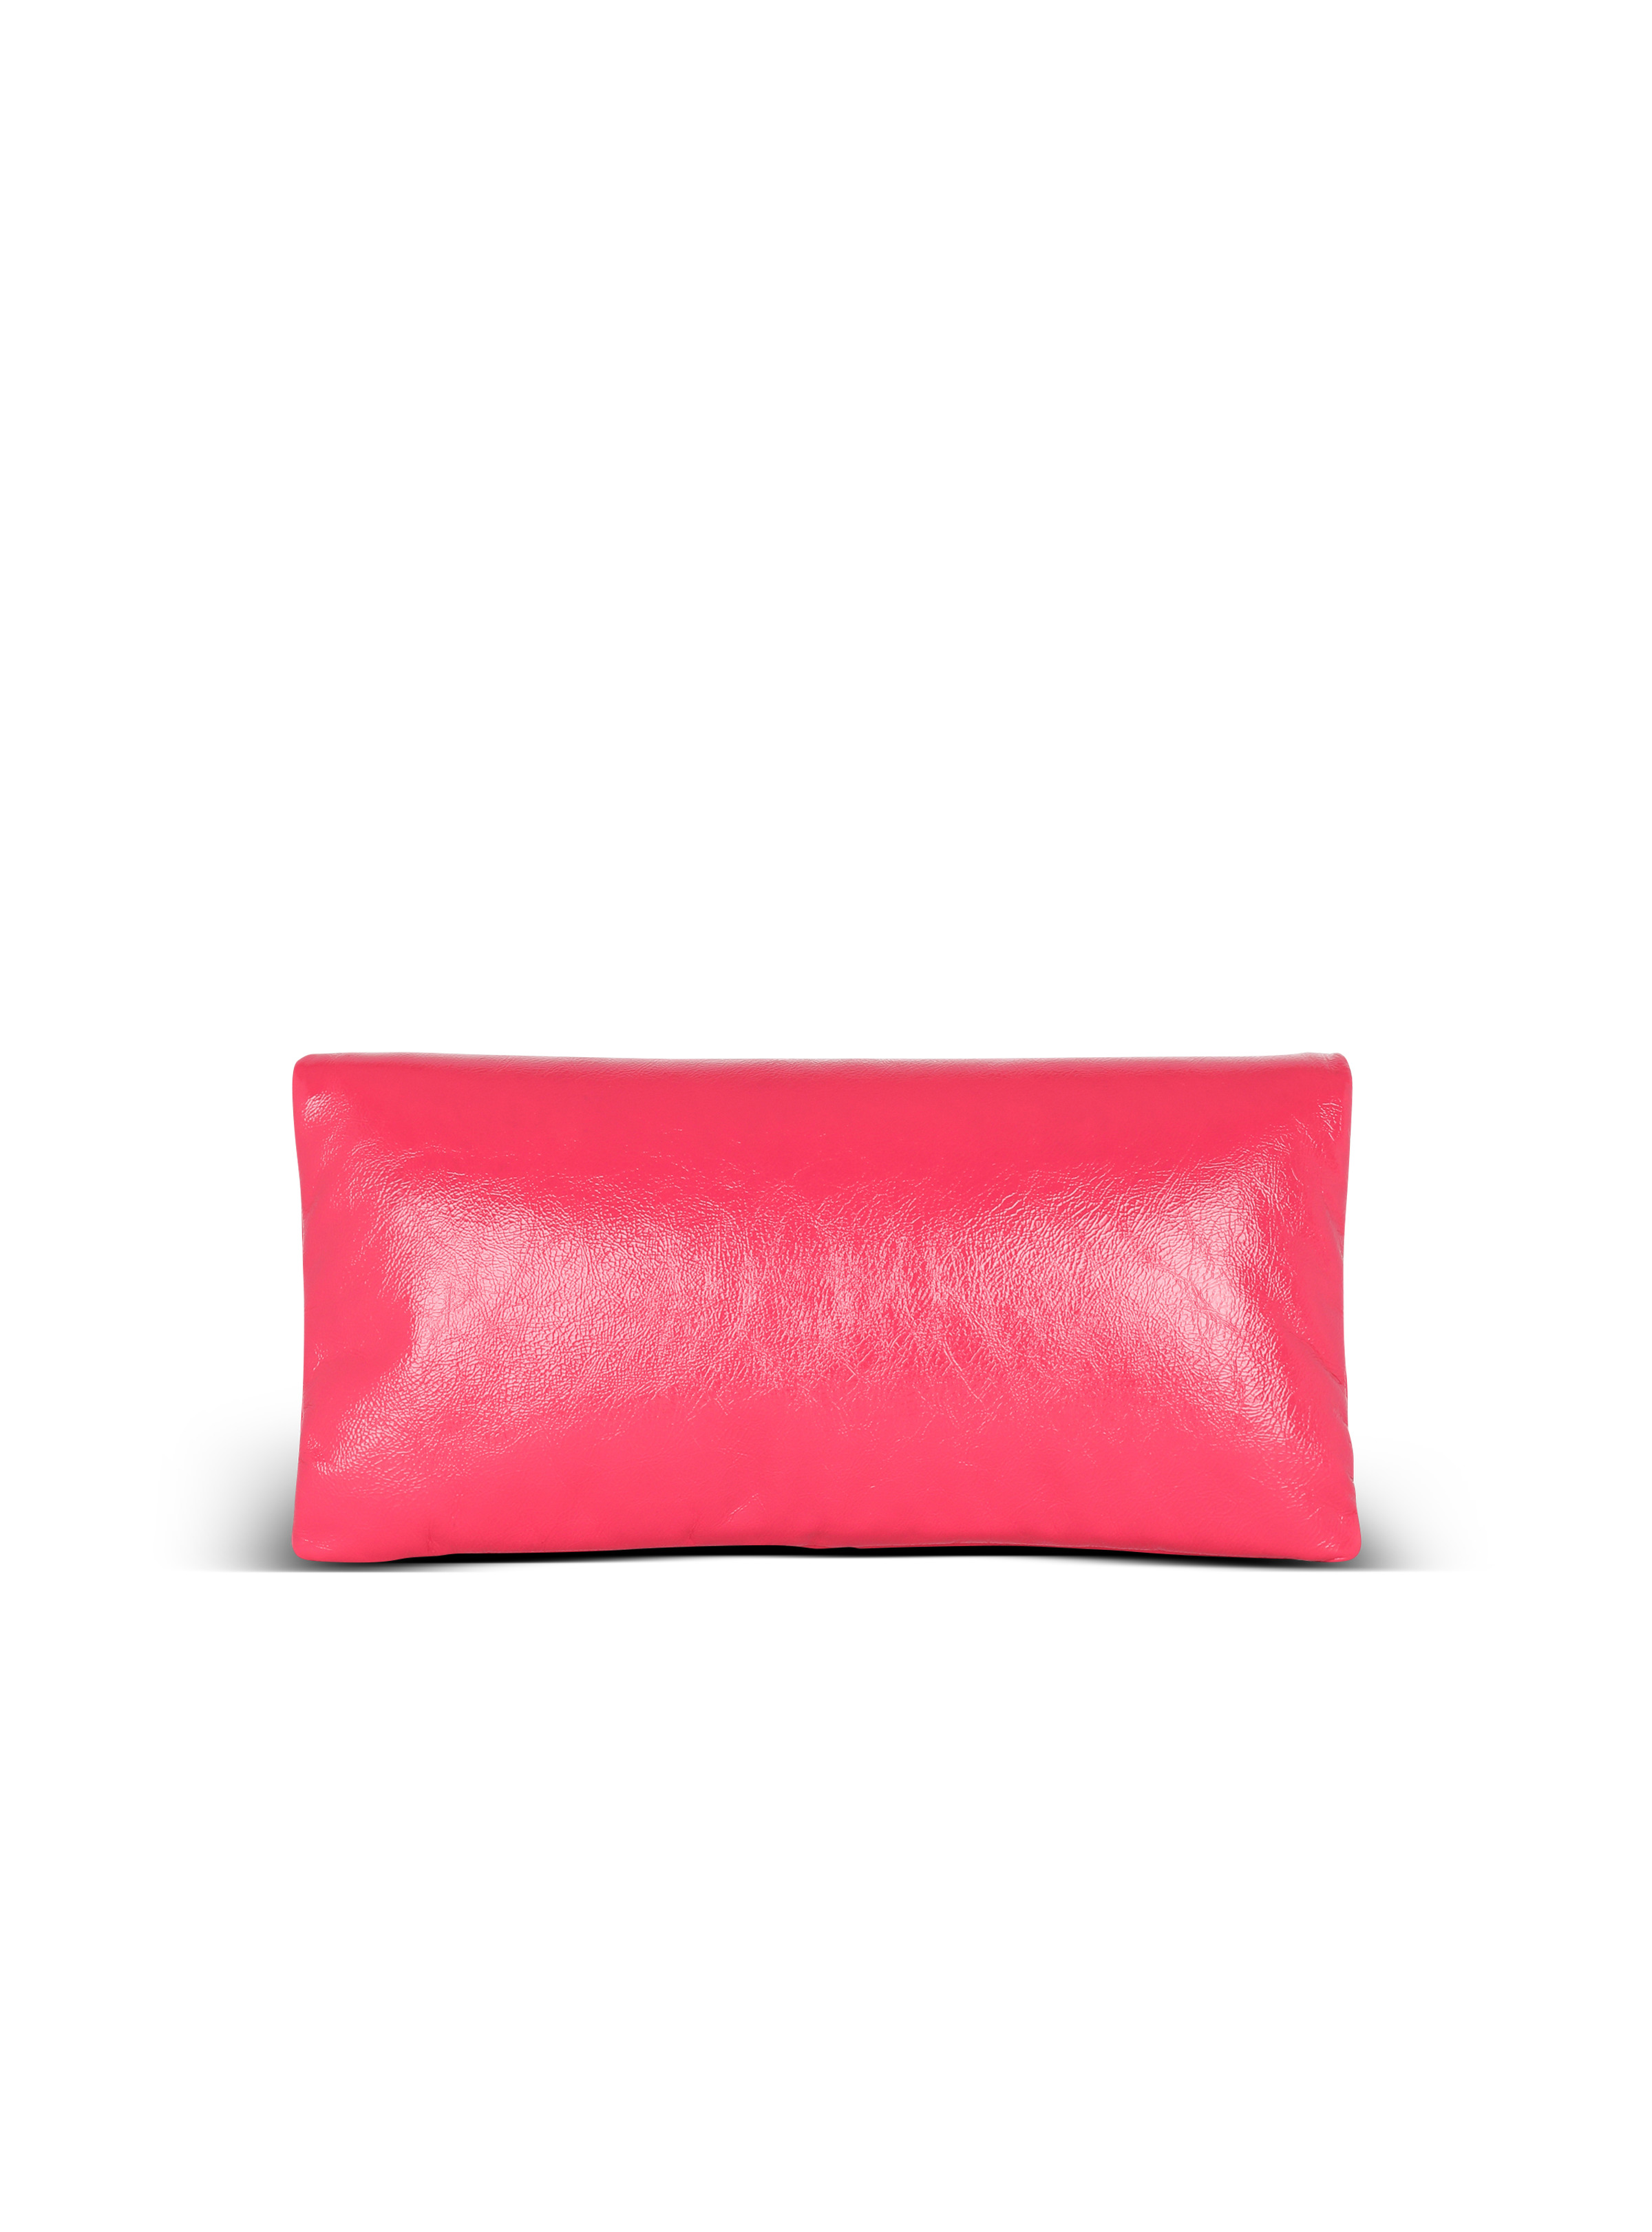 1945 Soft patent leather clutch - 4